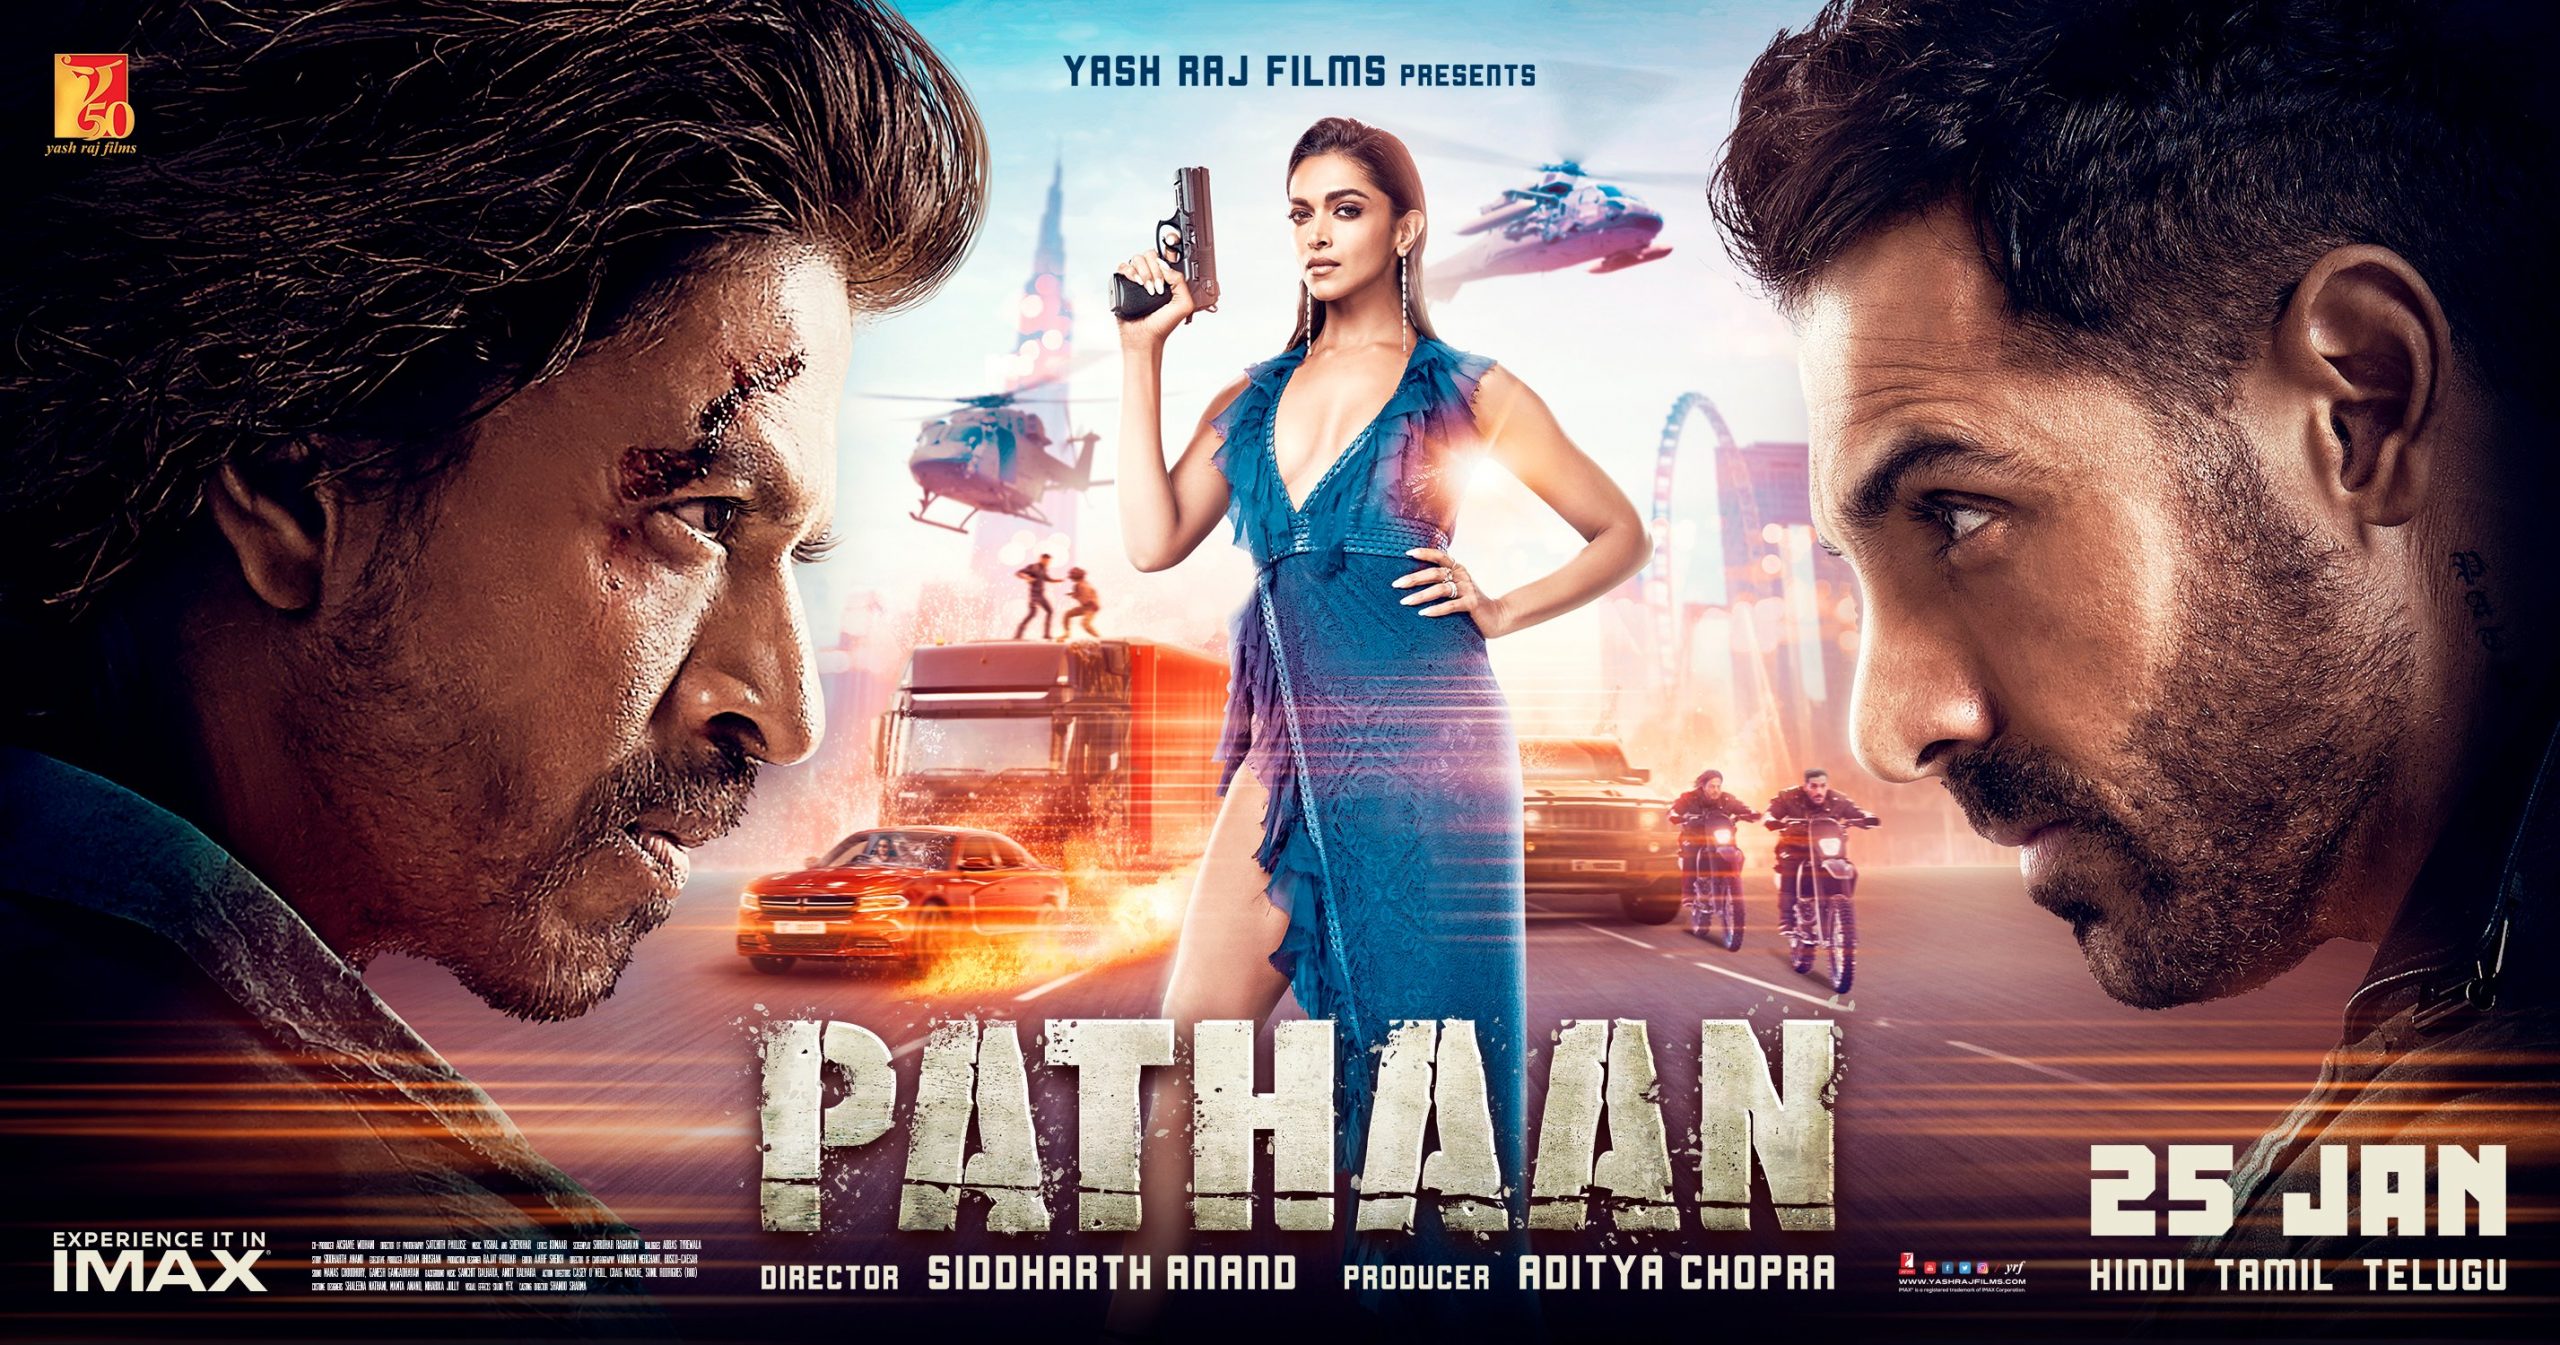 Pathan Box Office Collection Day Wise 1, 2 & 3